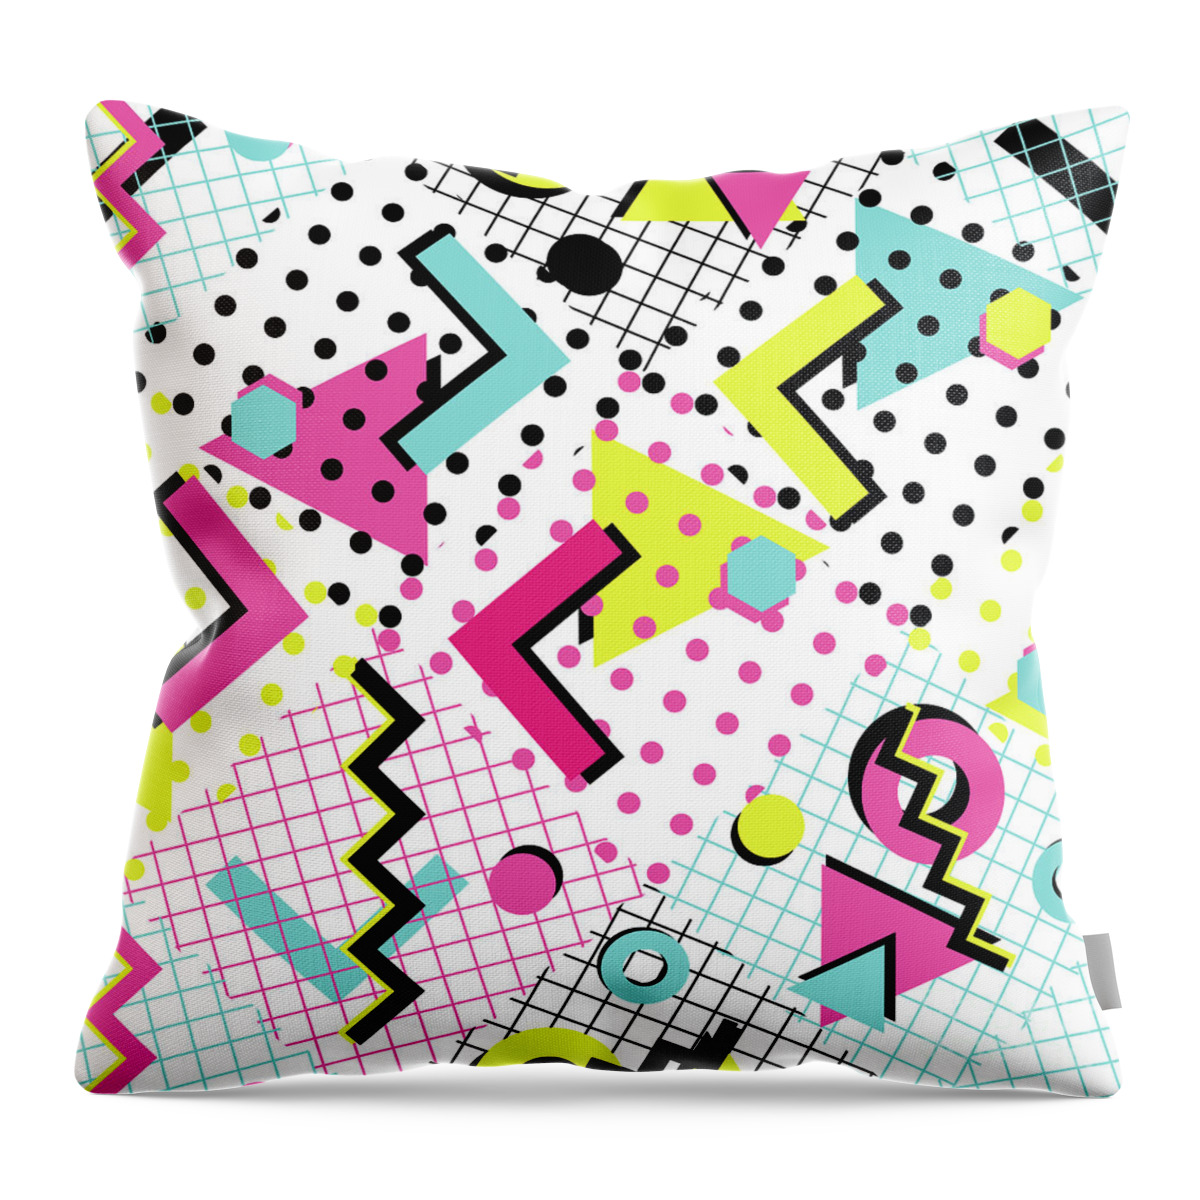 1980-1989 Throw Pillow featuring the digital art Colorful Abstract 80s Style Seamless #1 by Alex bond